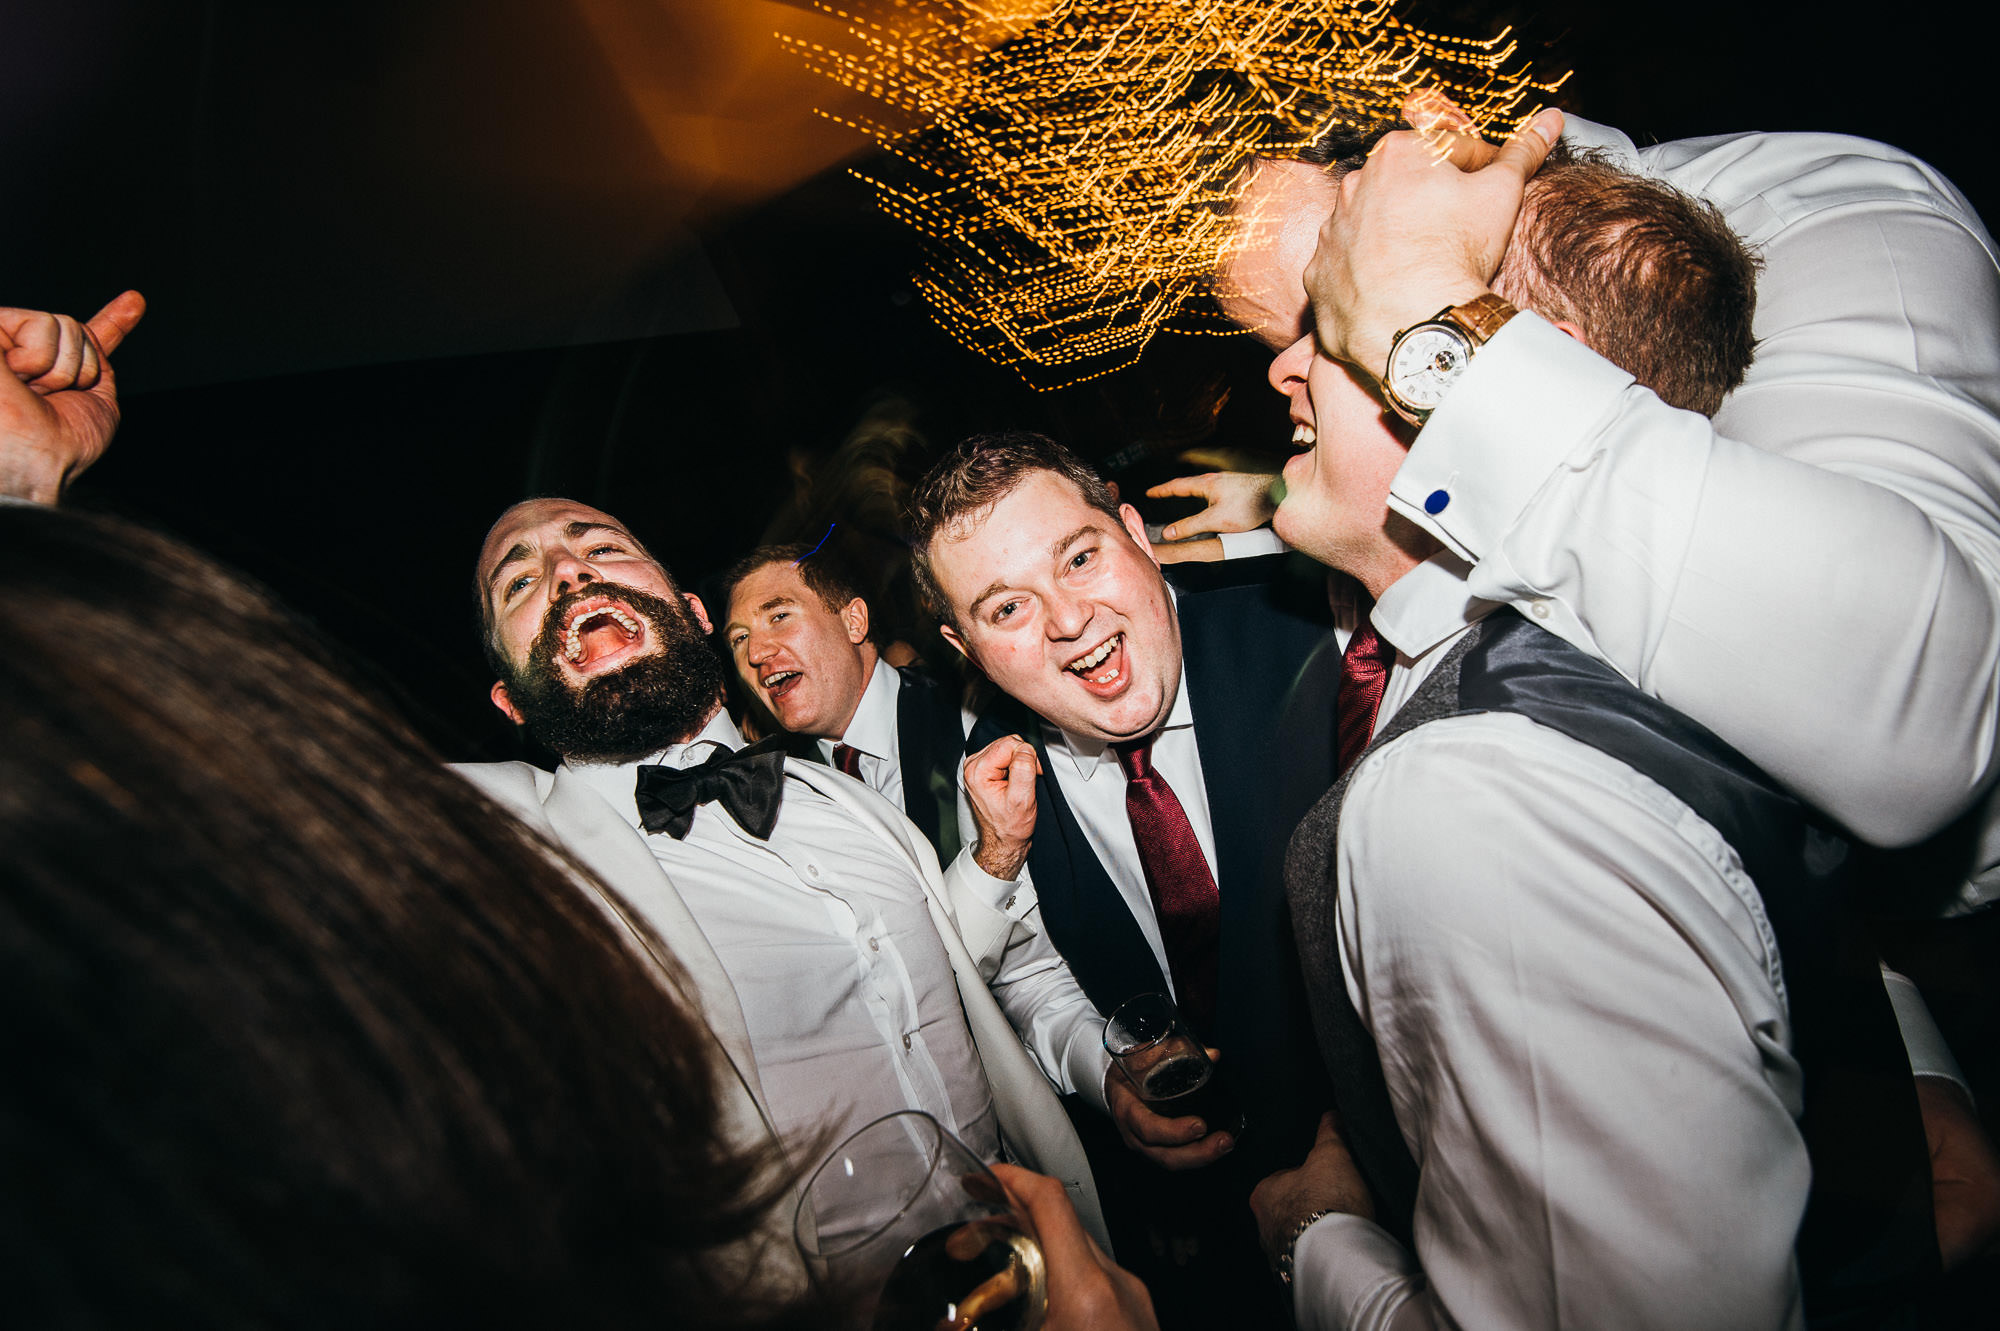 Party at Hengrave Hall wedding 